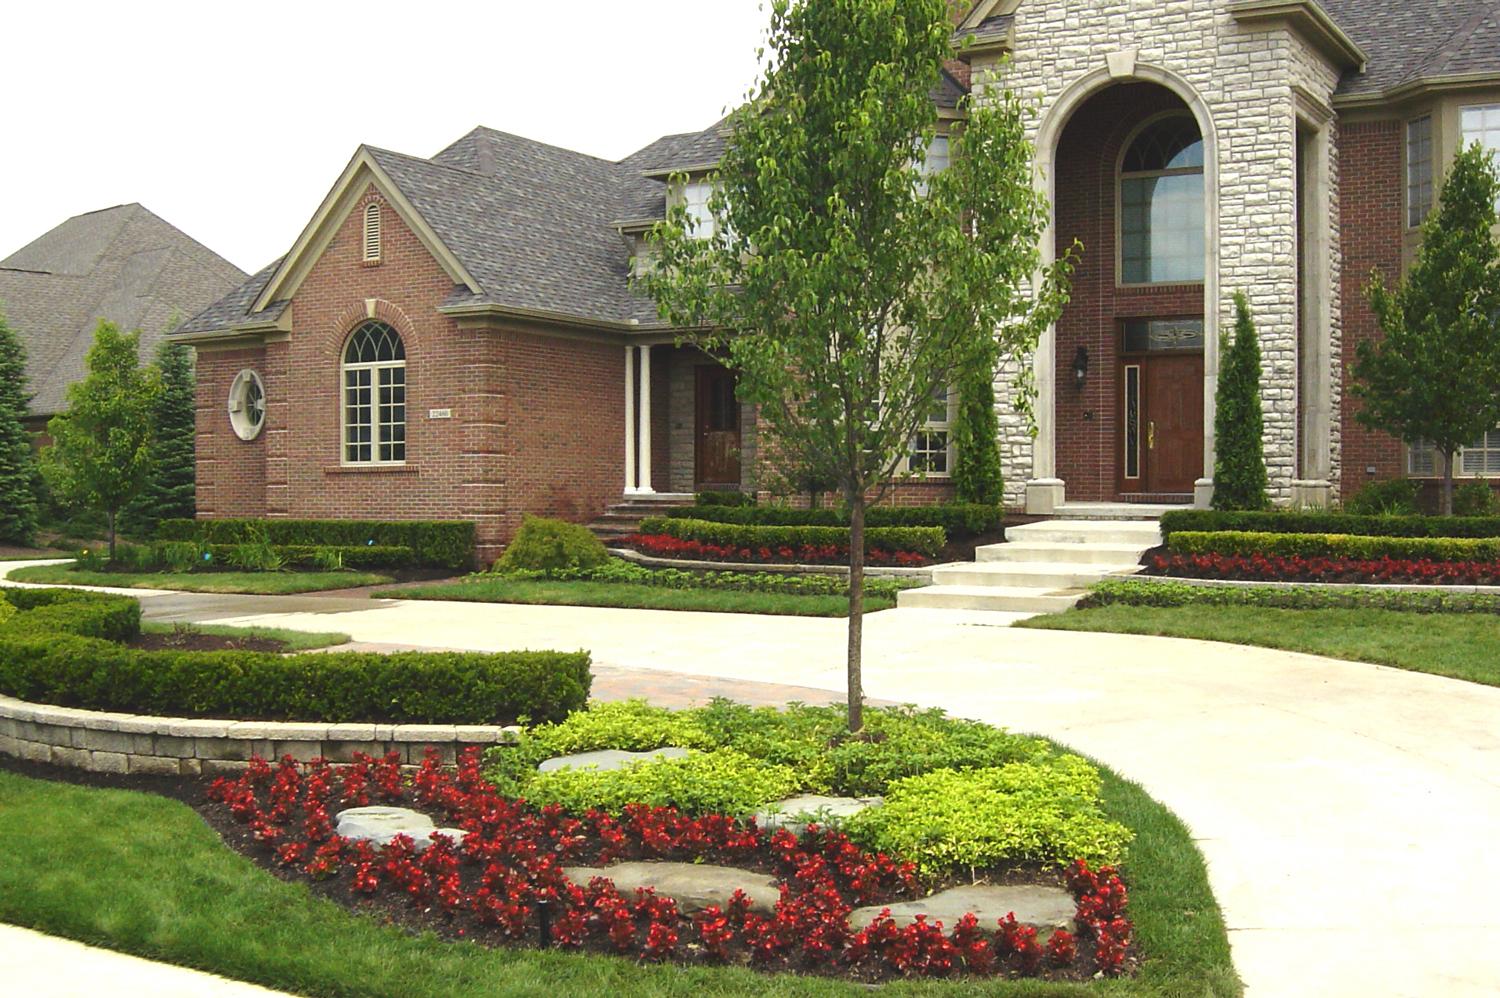 Landscaping Designs Front Yard